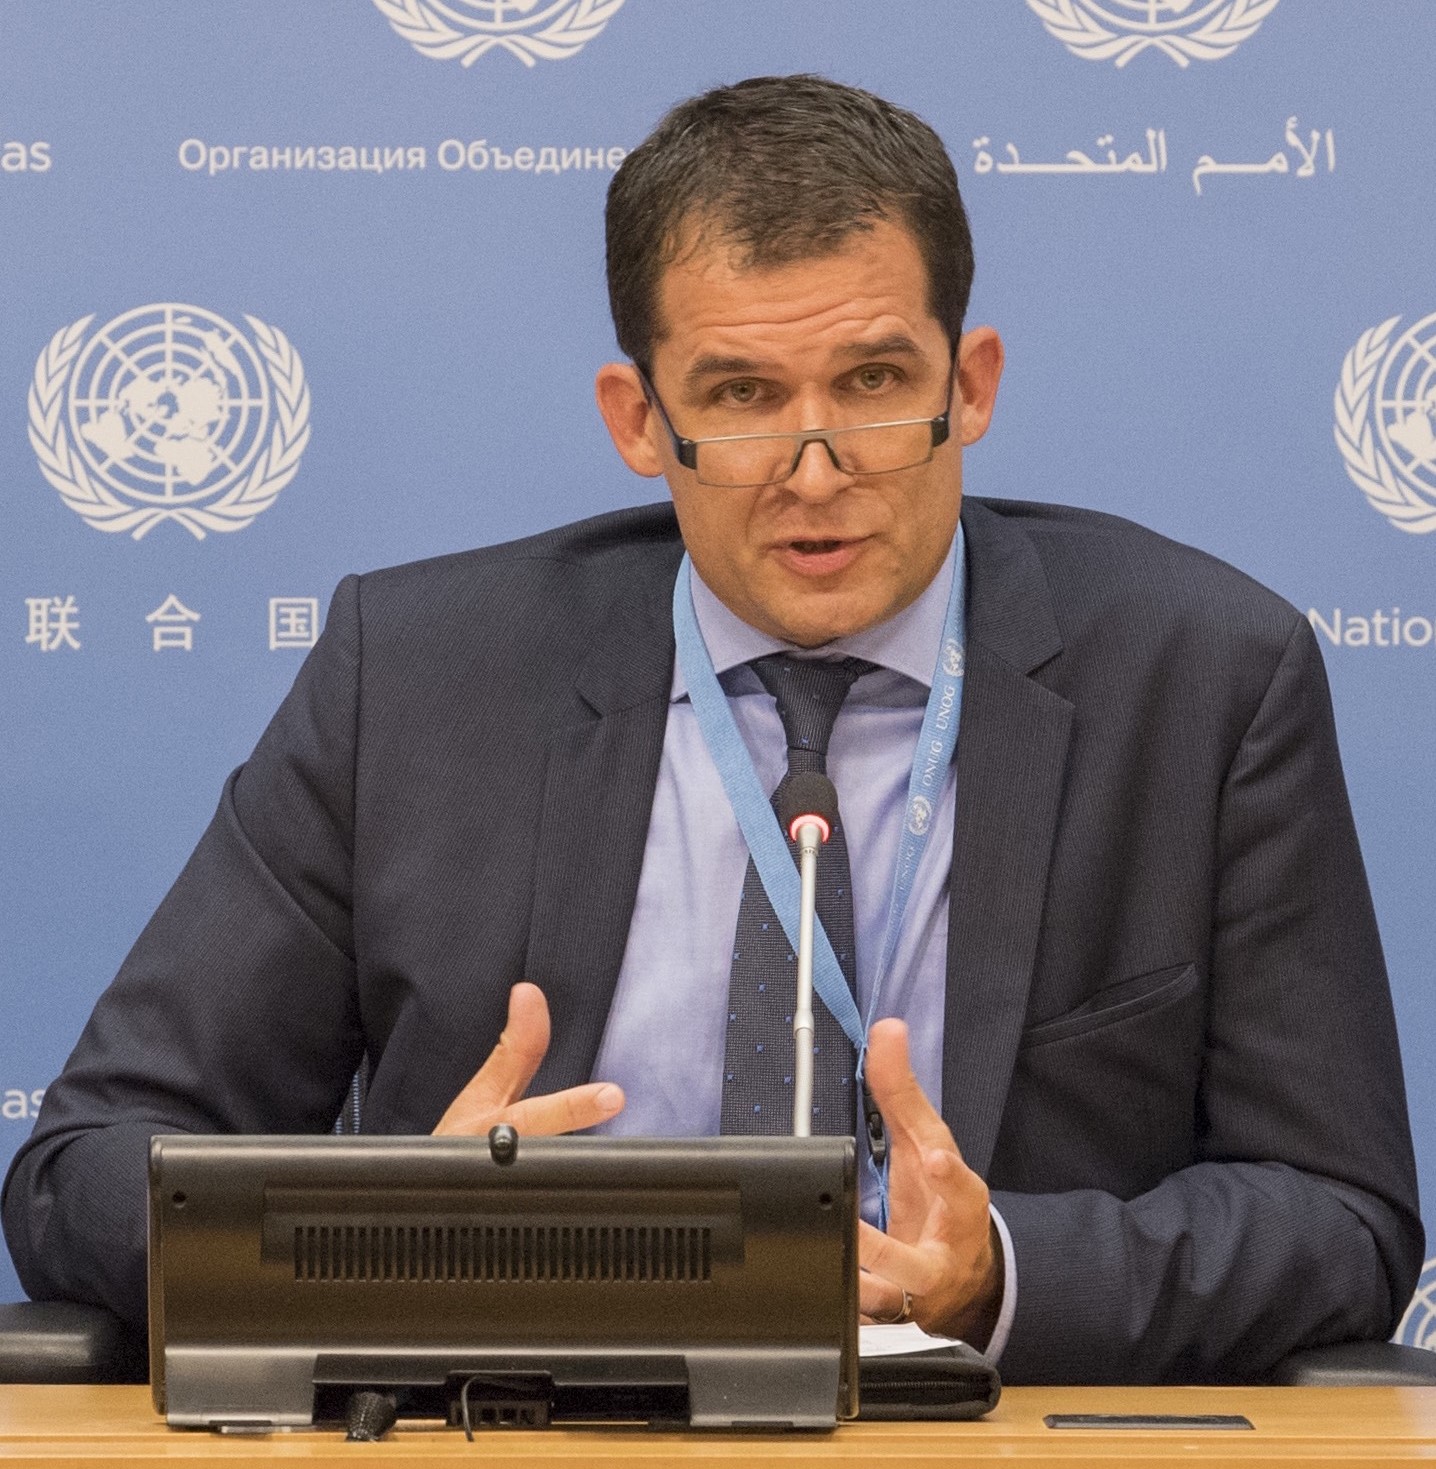 Prof. Nils Melzer, UN Special Rapporteur on Torture and Other Cruel, Inhuman or Degrading Treatment or Punishment. © KEYSTONE / Martial Trezzini